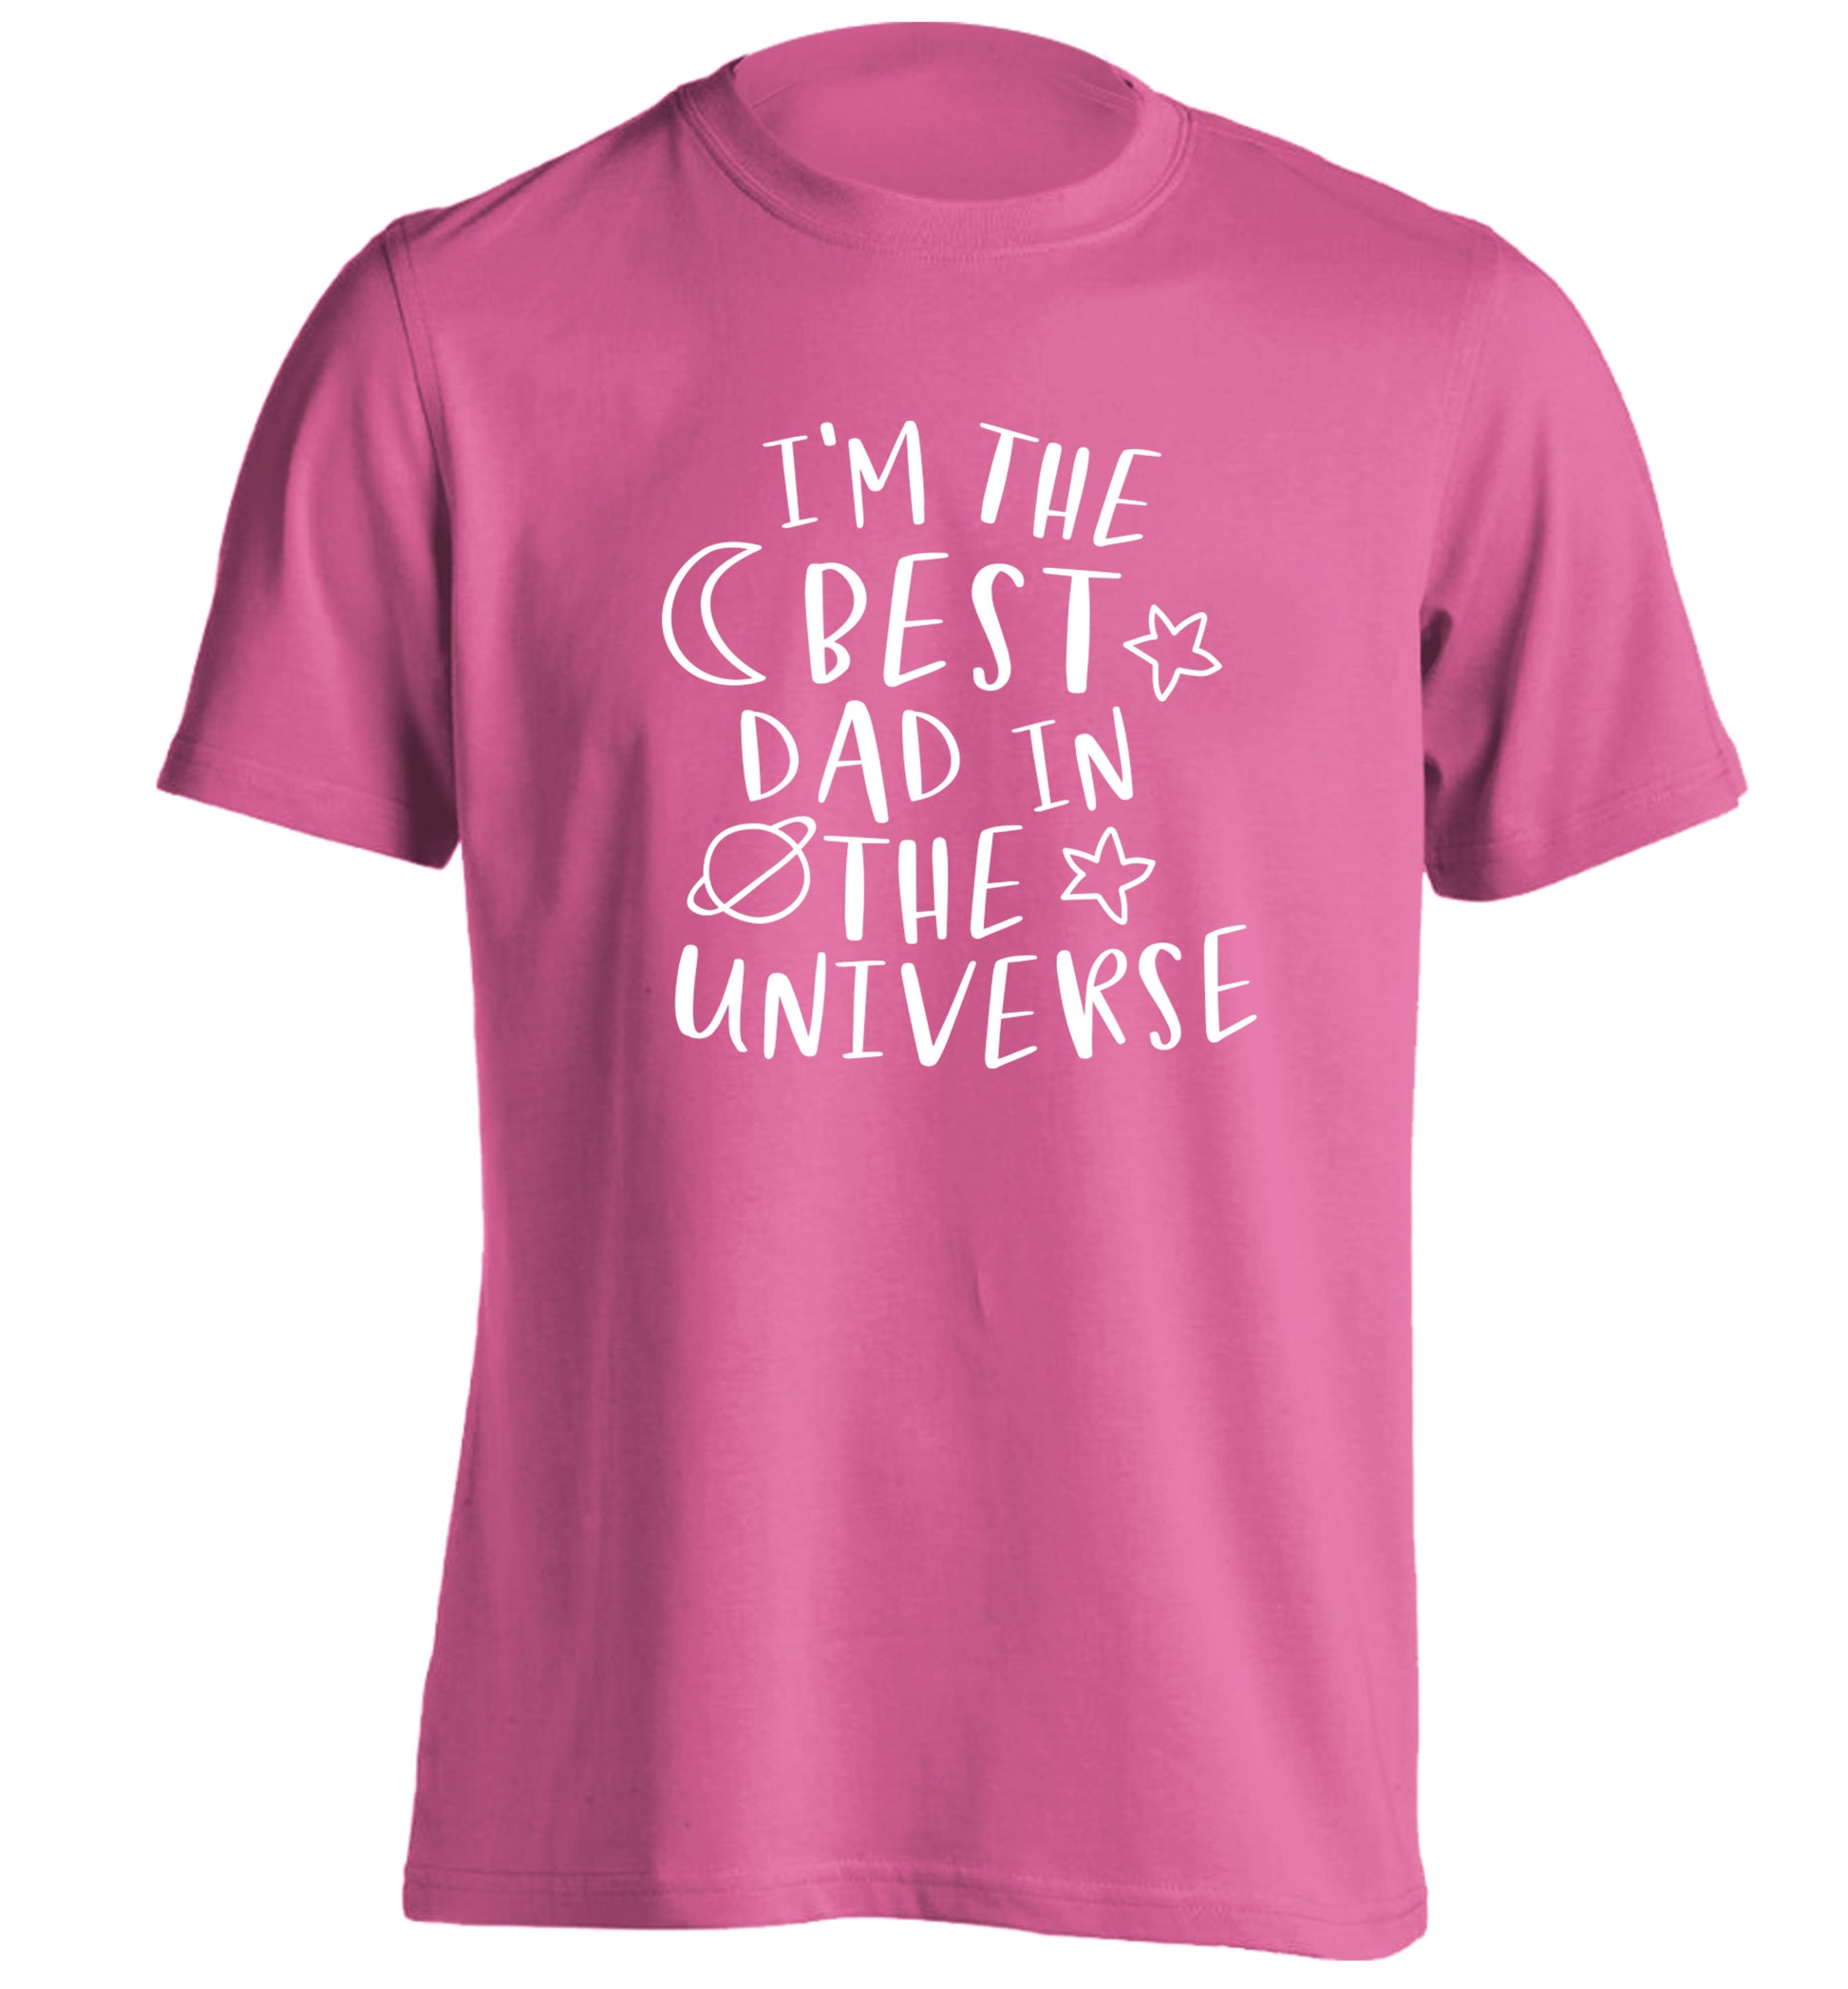 I'm the best dad in the universe adults unisex pink Tshirt 2XL